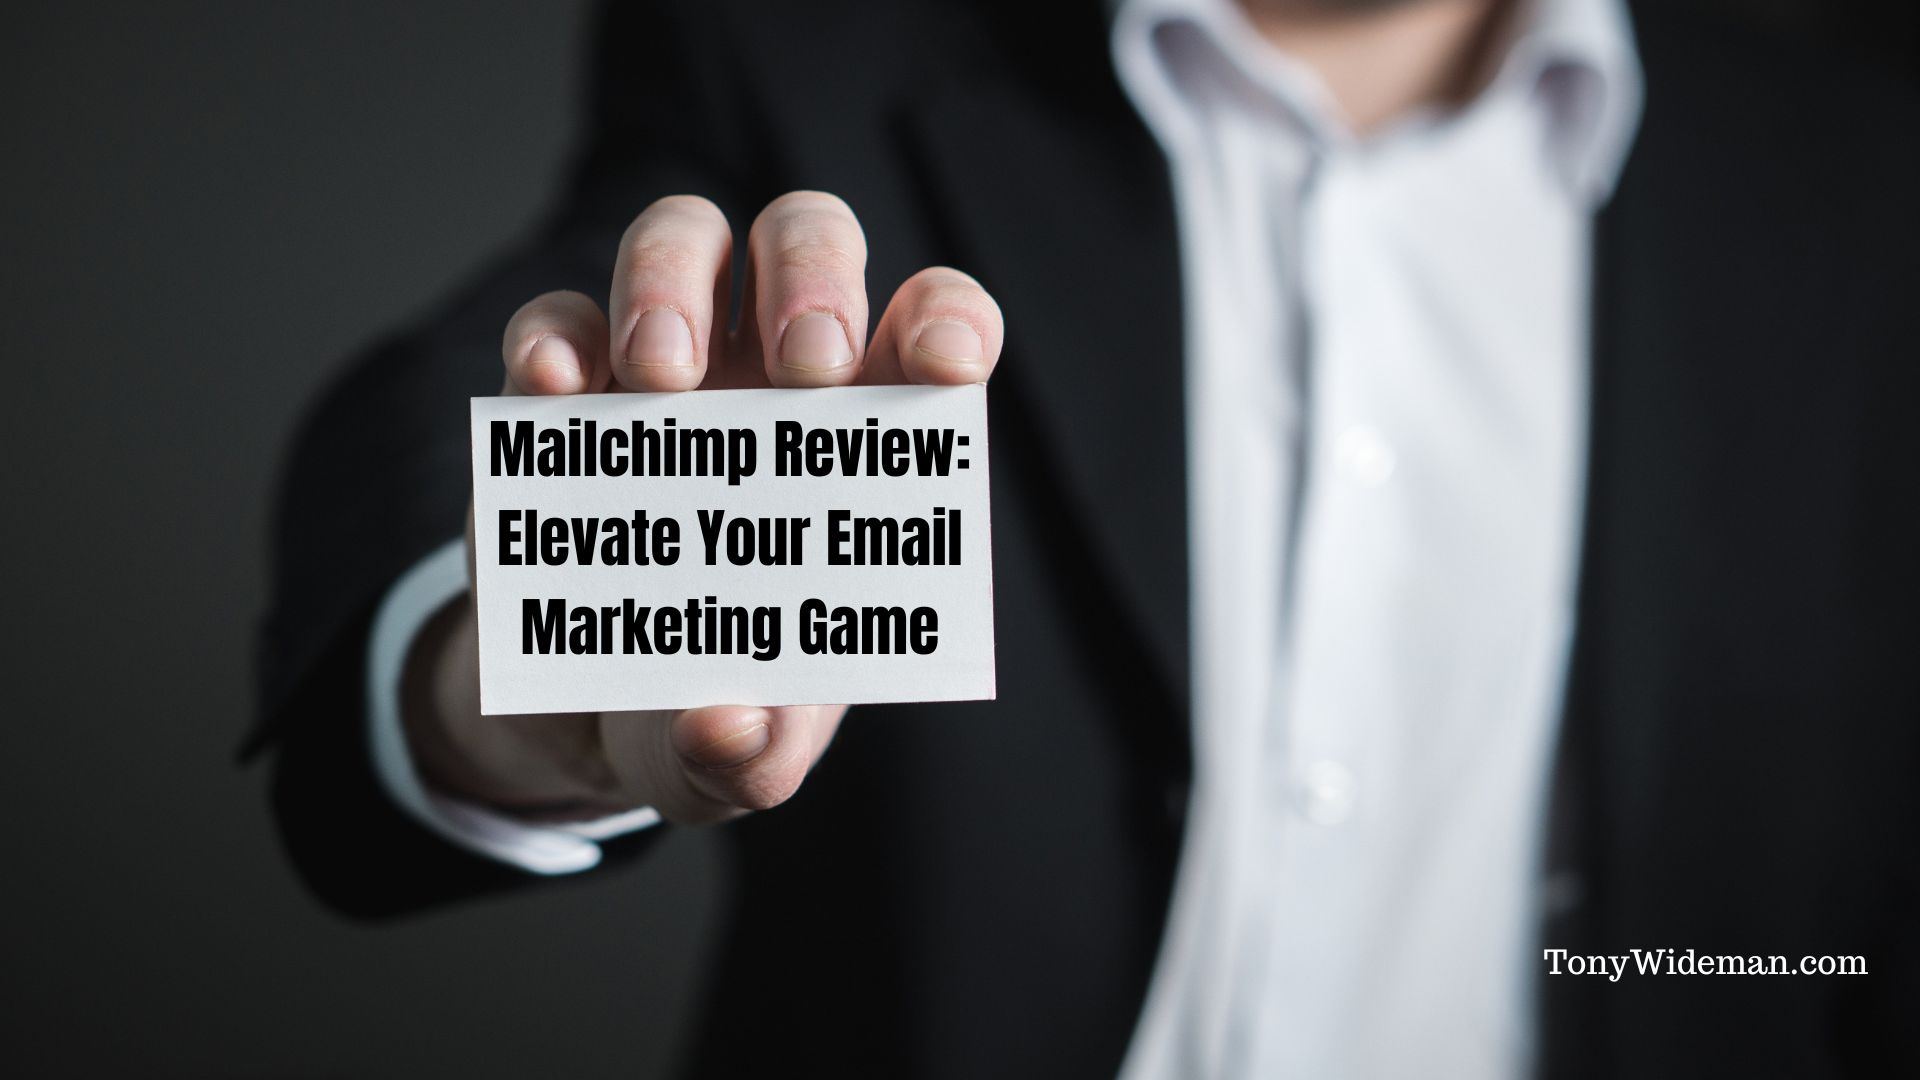 Mailchimp Review: Elevate Your Email Marketing Game